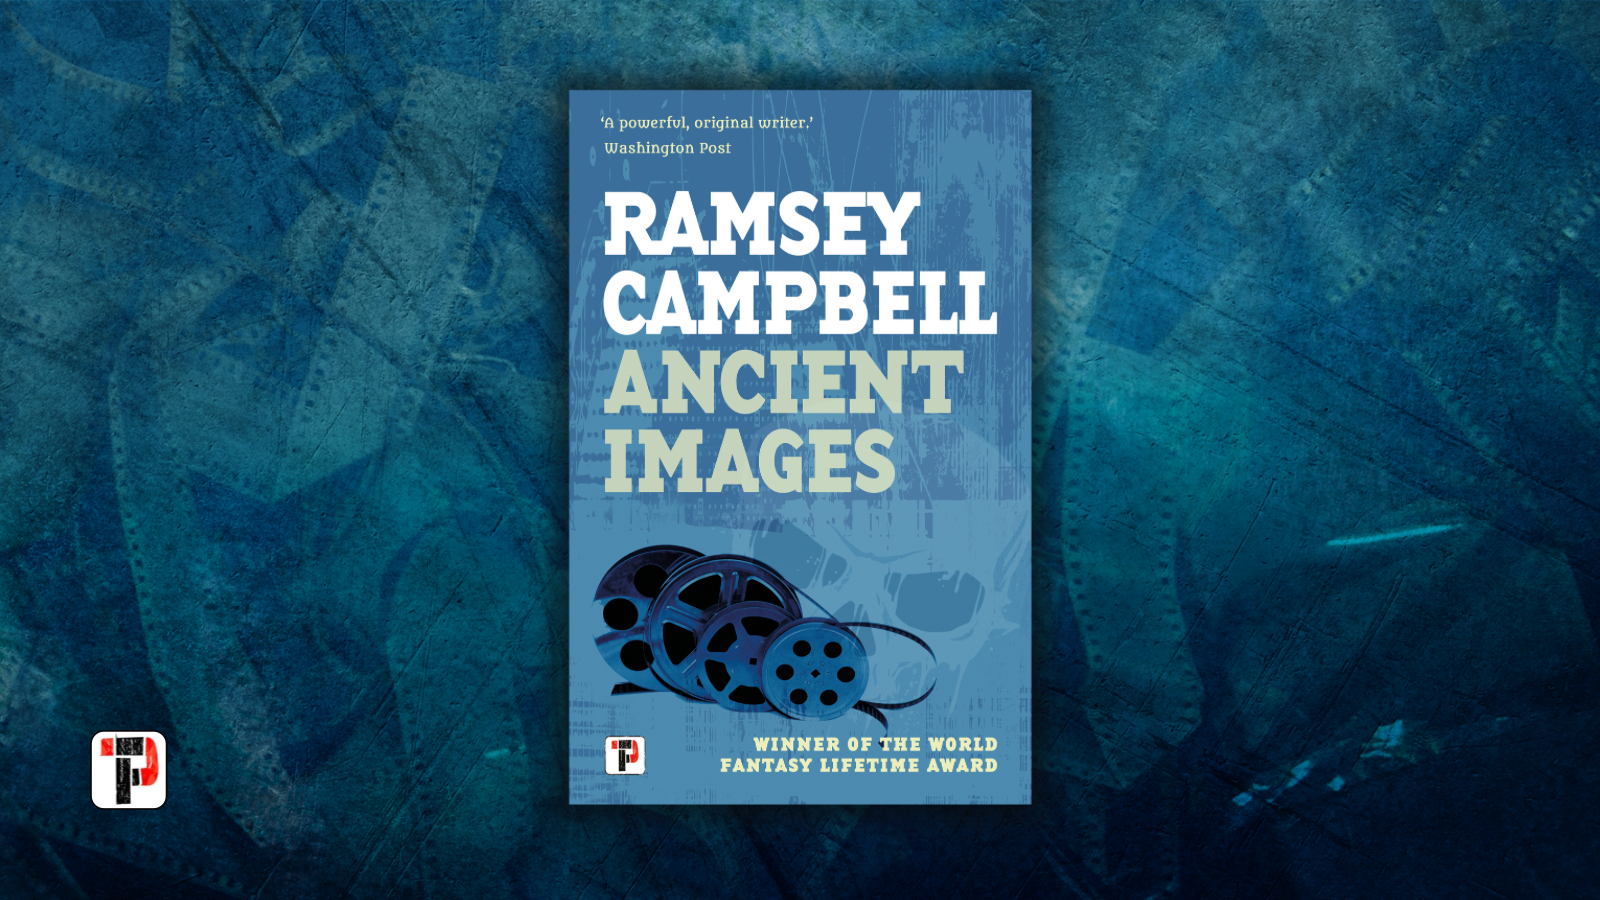 Ramsey Campbell ancient images horror author 